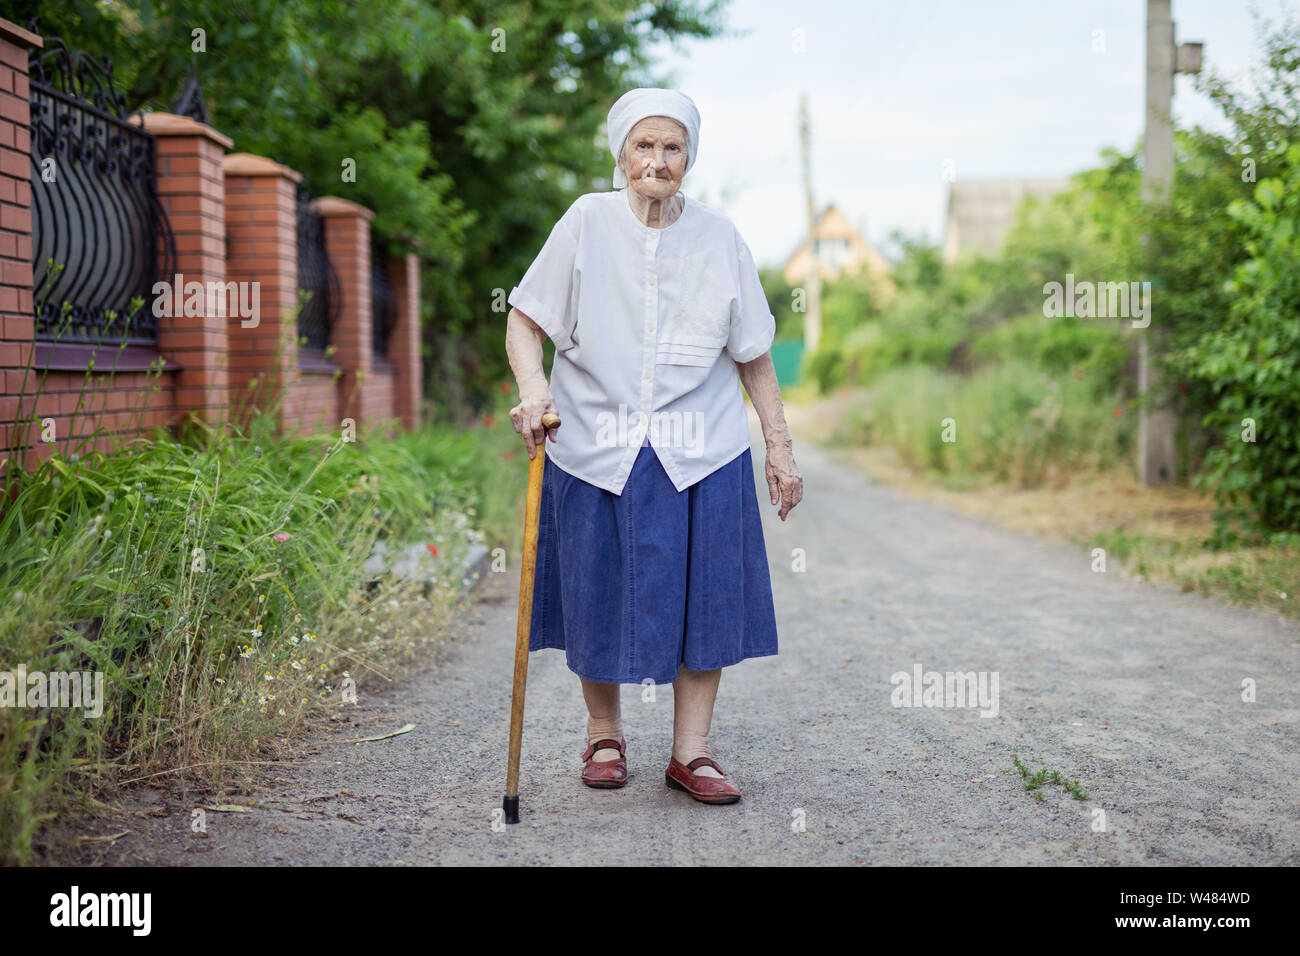 Portrait of senior woman walking down street in countryside Banque D'Images